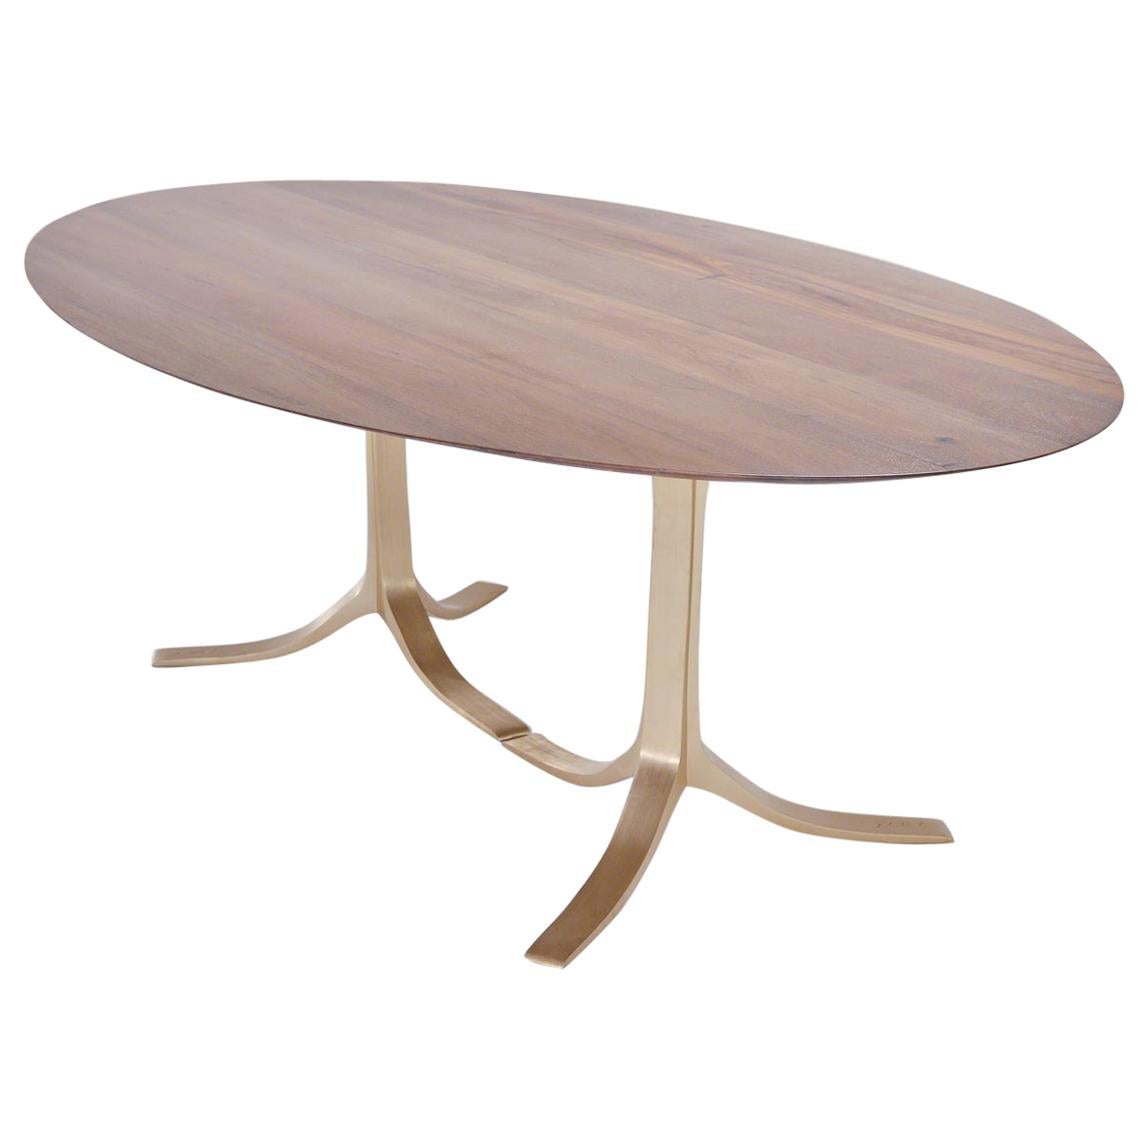 Bespoke Oval Table, Reclaimed Hardwood with Brass Base, by P. Tendercool